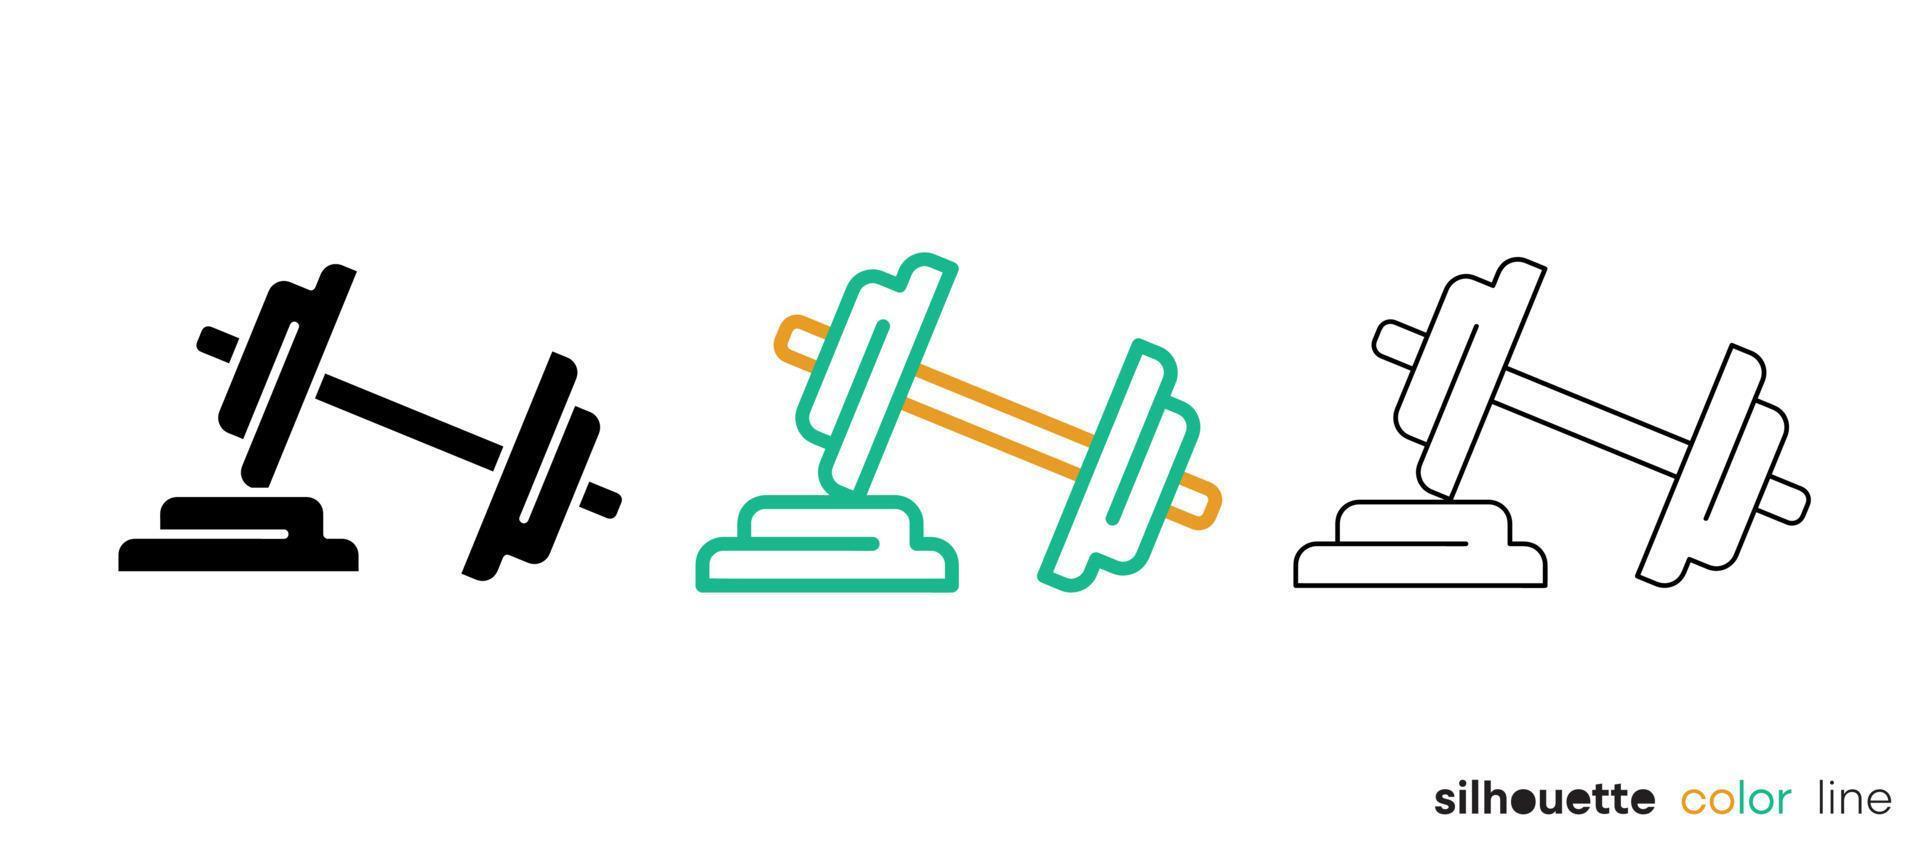 Dumbbell icon set. Simple design related to fitness. Silhouette, colorful and linear set. Editable logo. vector